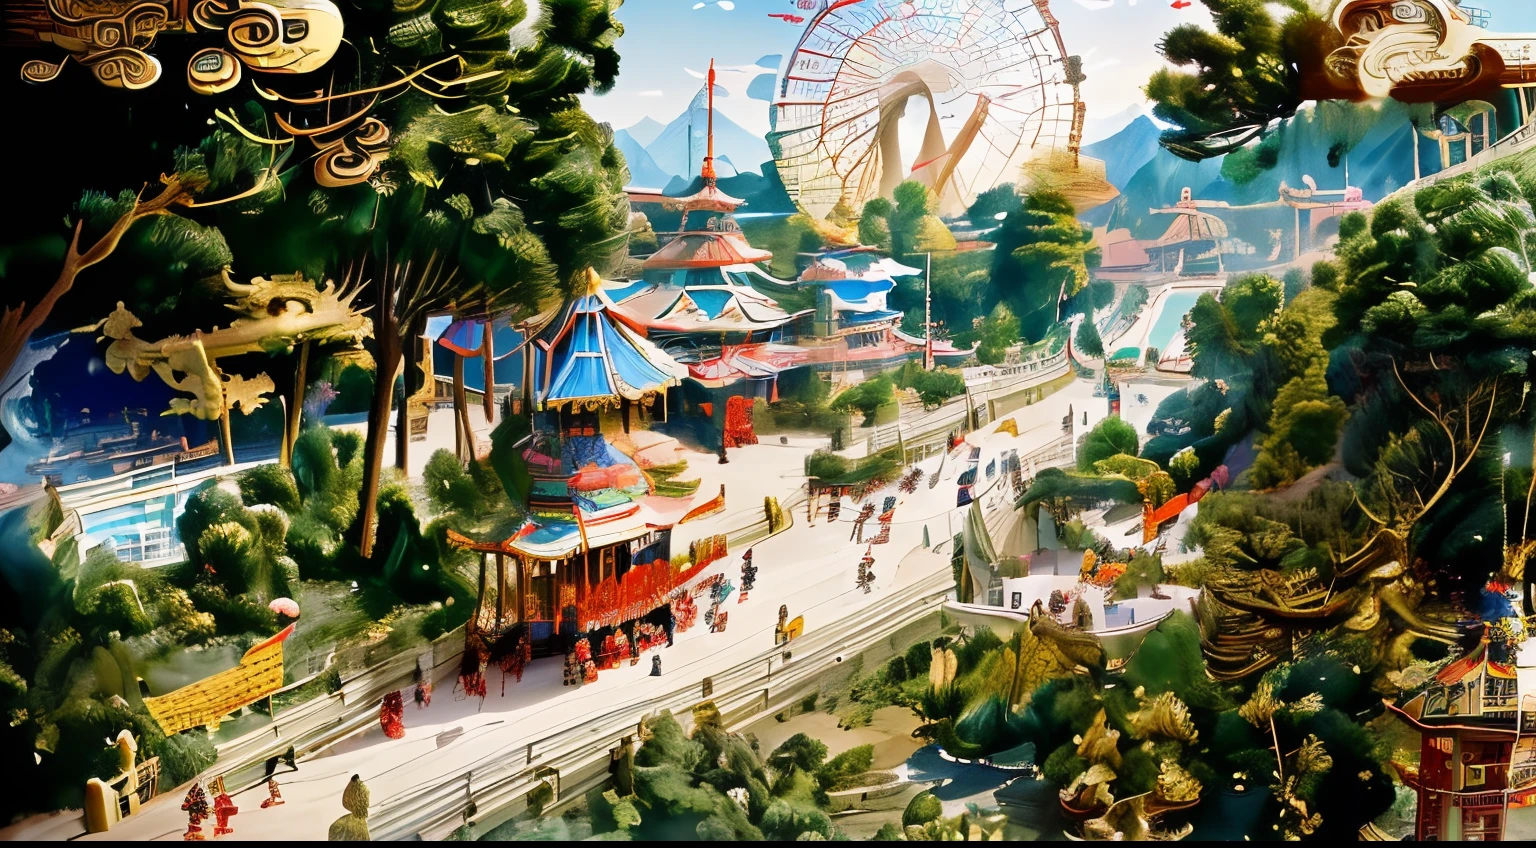 The theme is an amusement park scene with Chinese style elements, from an aerial perspective. The amusement facilities based on Chinese style elements include roller coasters, Ferris wheels, carousels, etc., with mountains and water, and a beautiful environment. The Chinese style amusement park is like a fairyland, and during the day